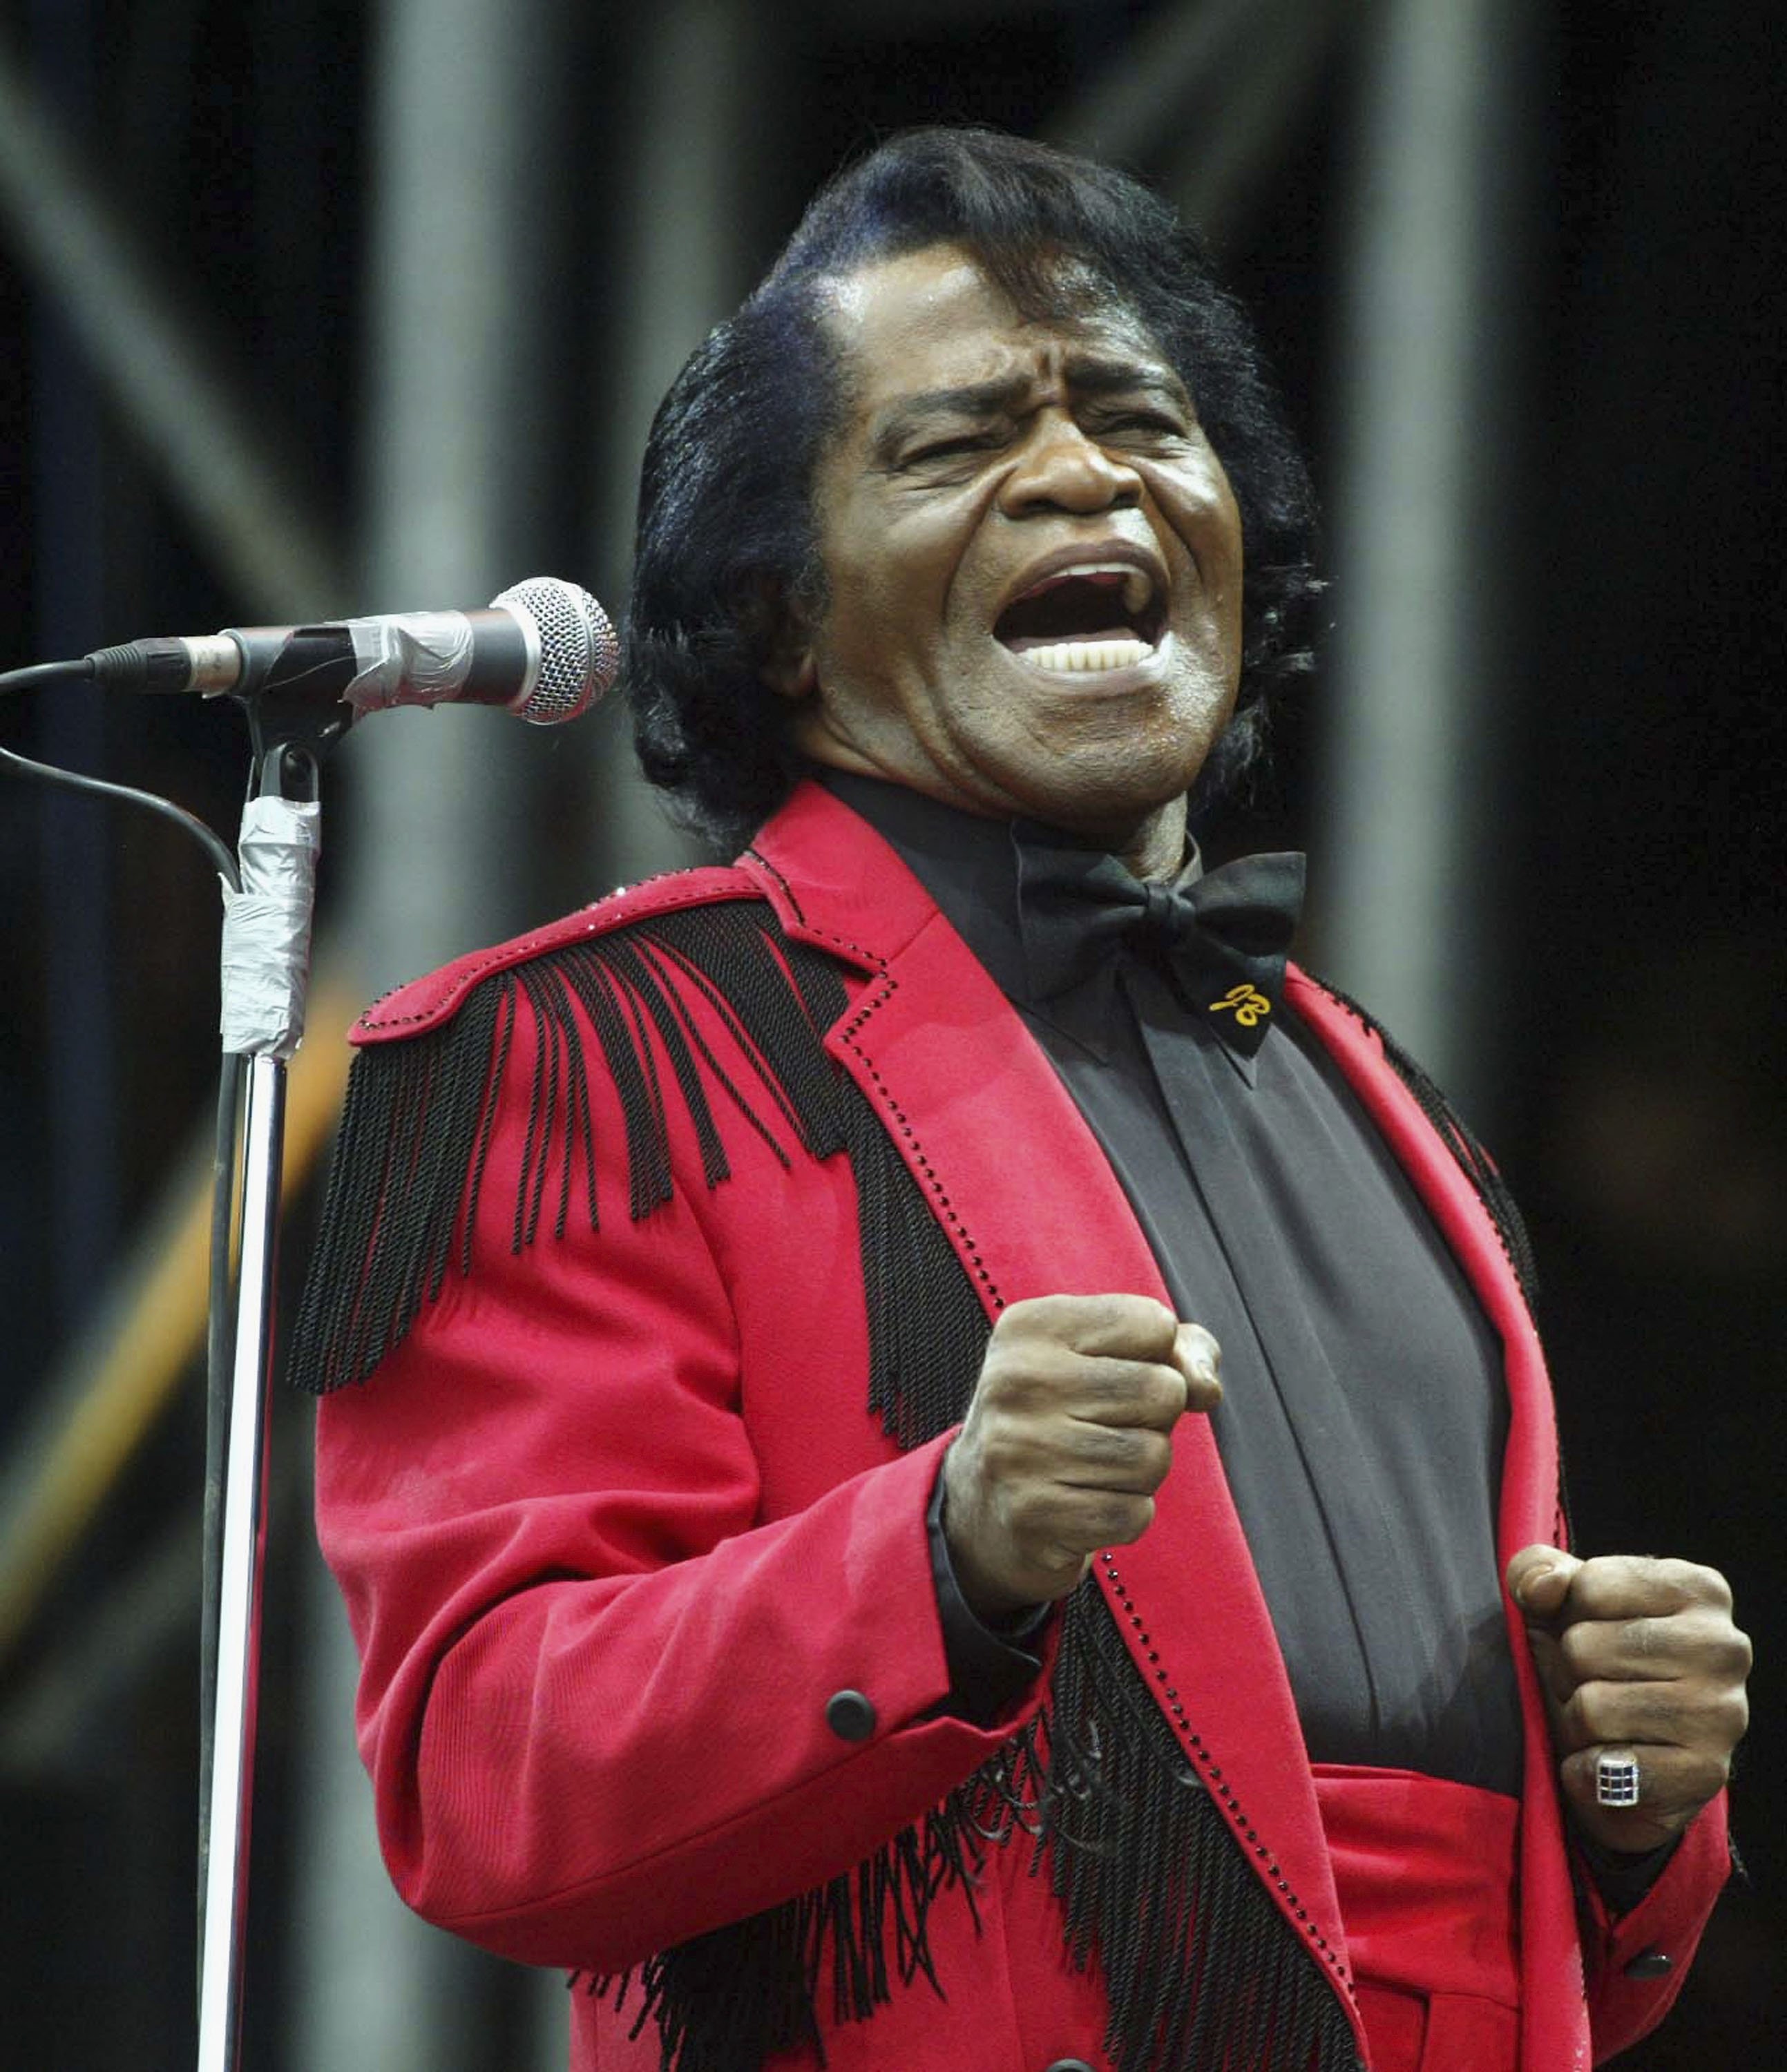 James Brown at the Glastonbury Festival on June 27, 2004 in Somerset, England | Photo: Getty Images